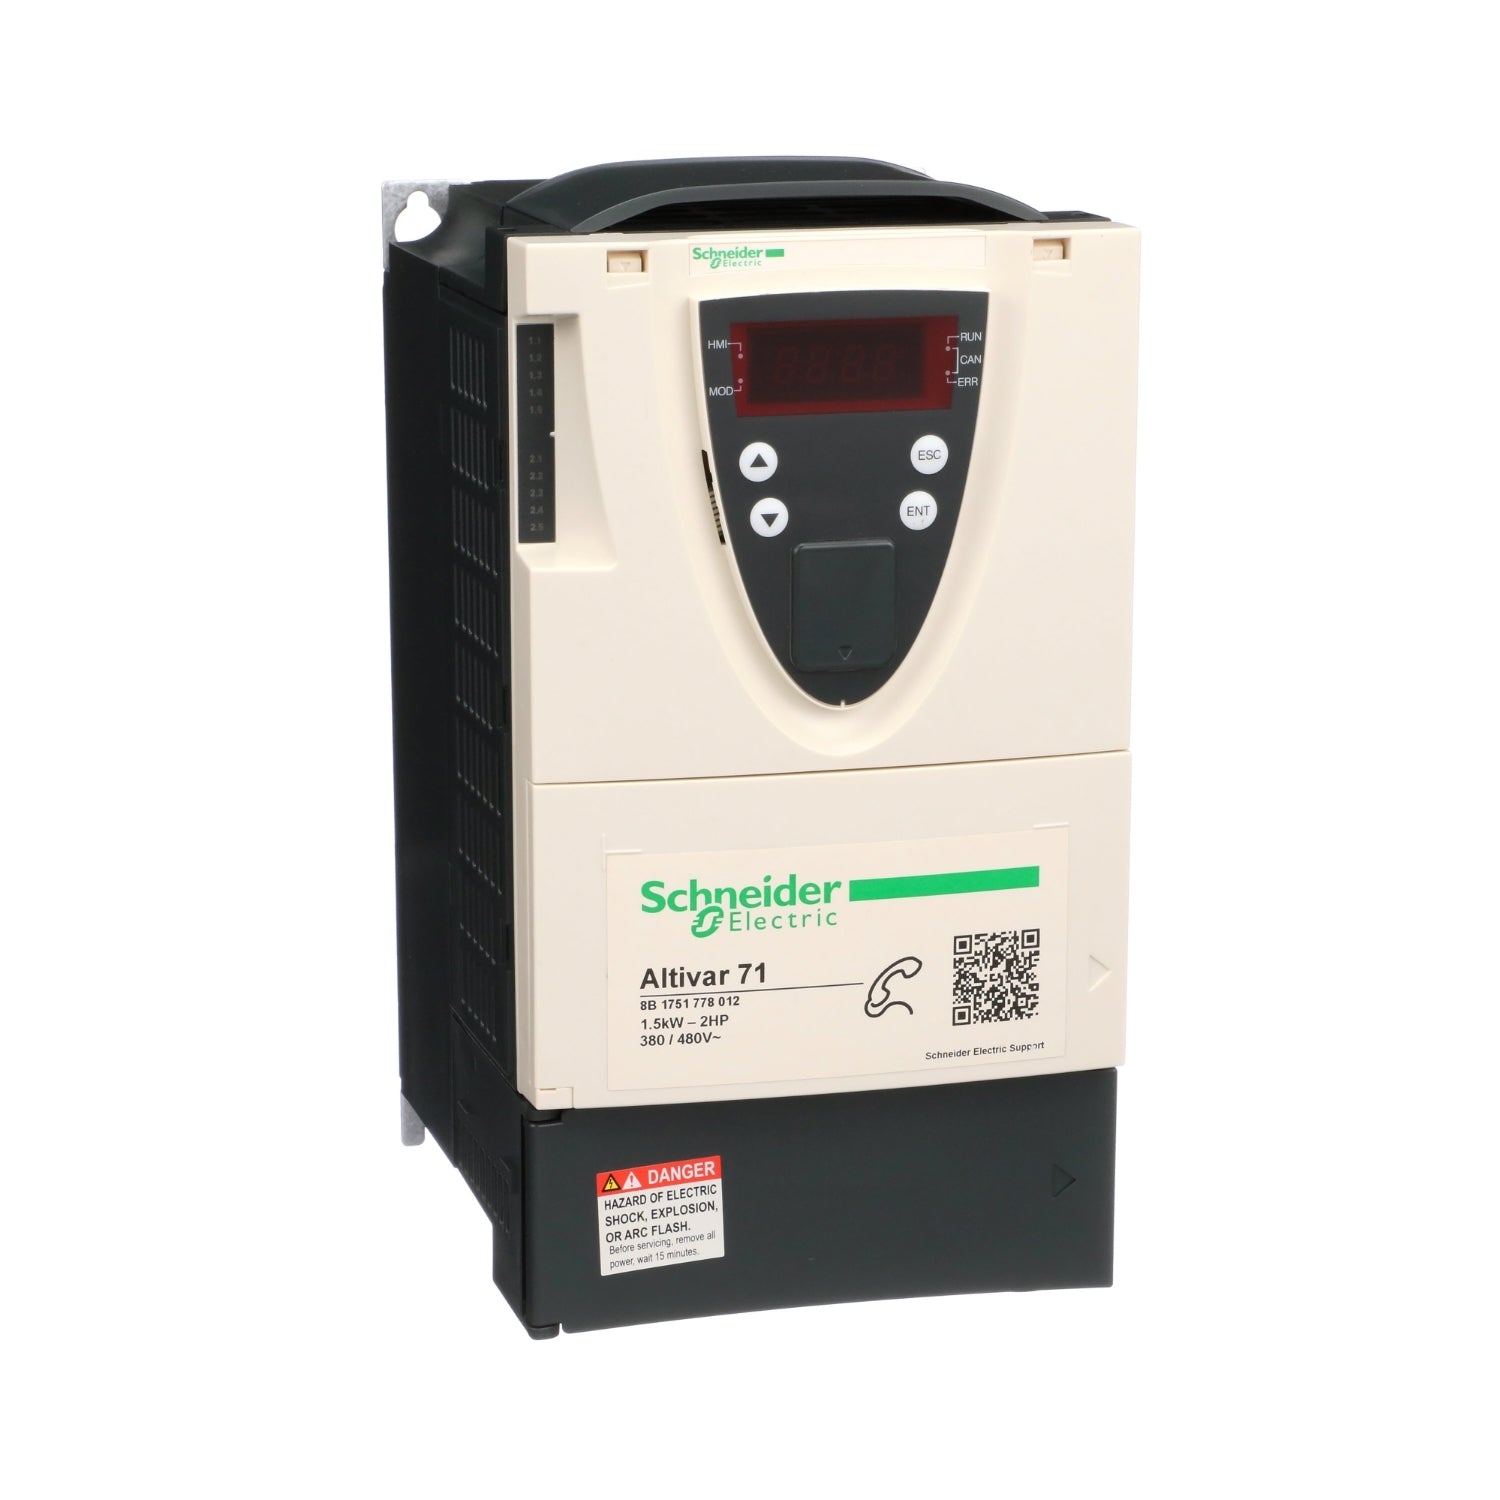 ATV71HU15N4Z | Schneider Electric | Variable speed drive, ATV71, 1.5kW, 2HP, 380 to 480V, 43dB, EMC filter, without graphic terminal, CANopen, Modbus